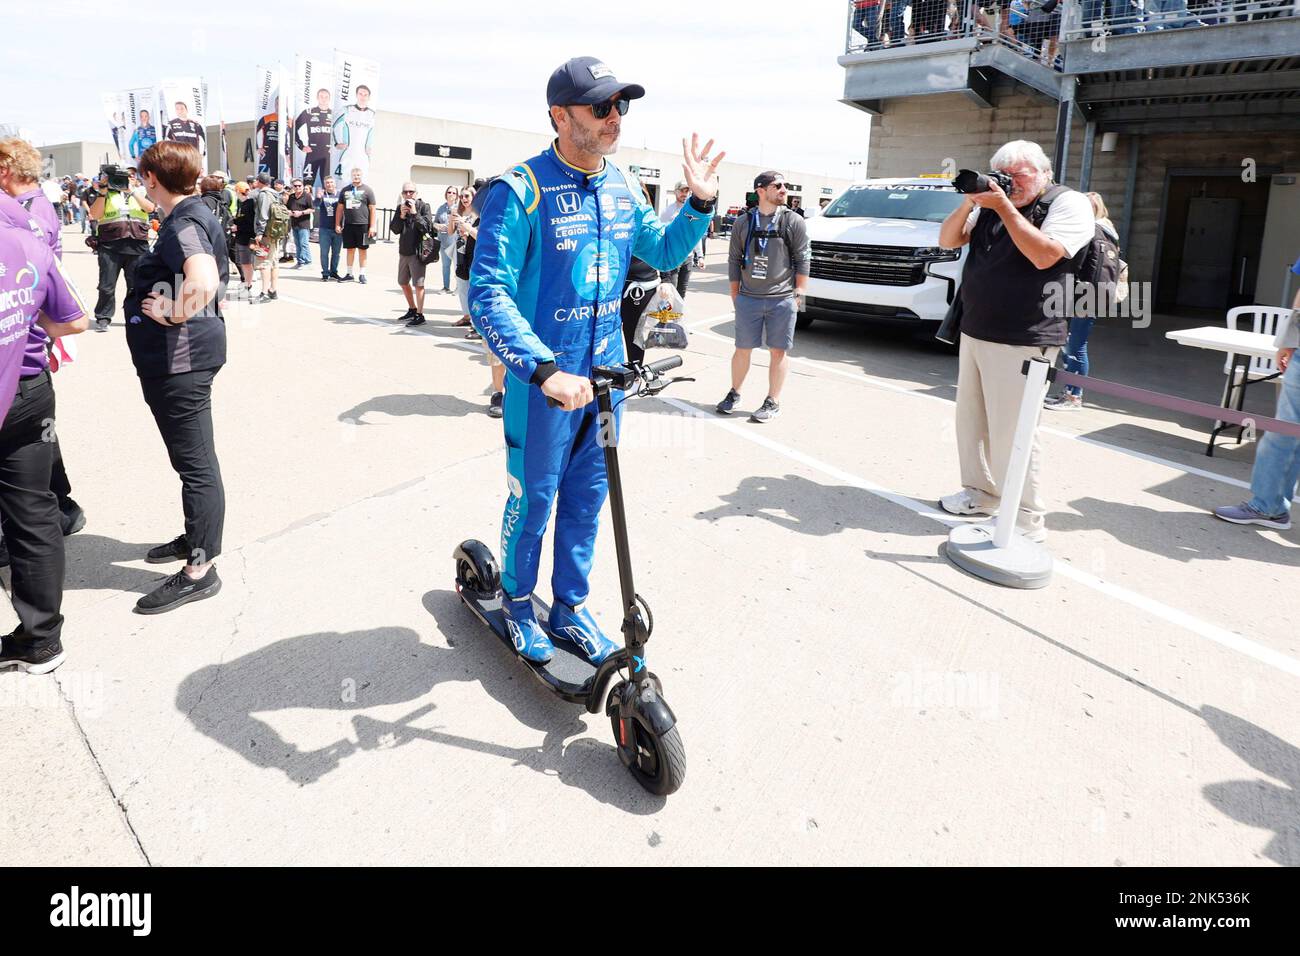 Lee Korn tusind INDIANAPOLIS, IN - MAY 22: NTT IndyCar series driver Jimmie Johnson rides  his scooter through Gasoline Alley on May 22nd, 2022 during qualifications  for the 106th running of the Indianapolis 500 at